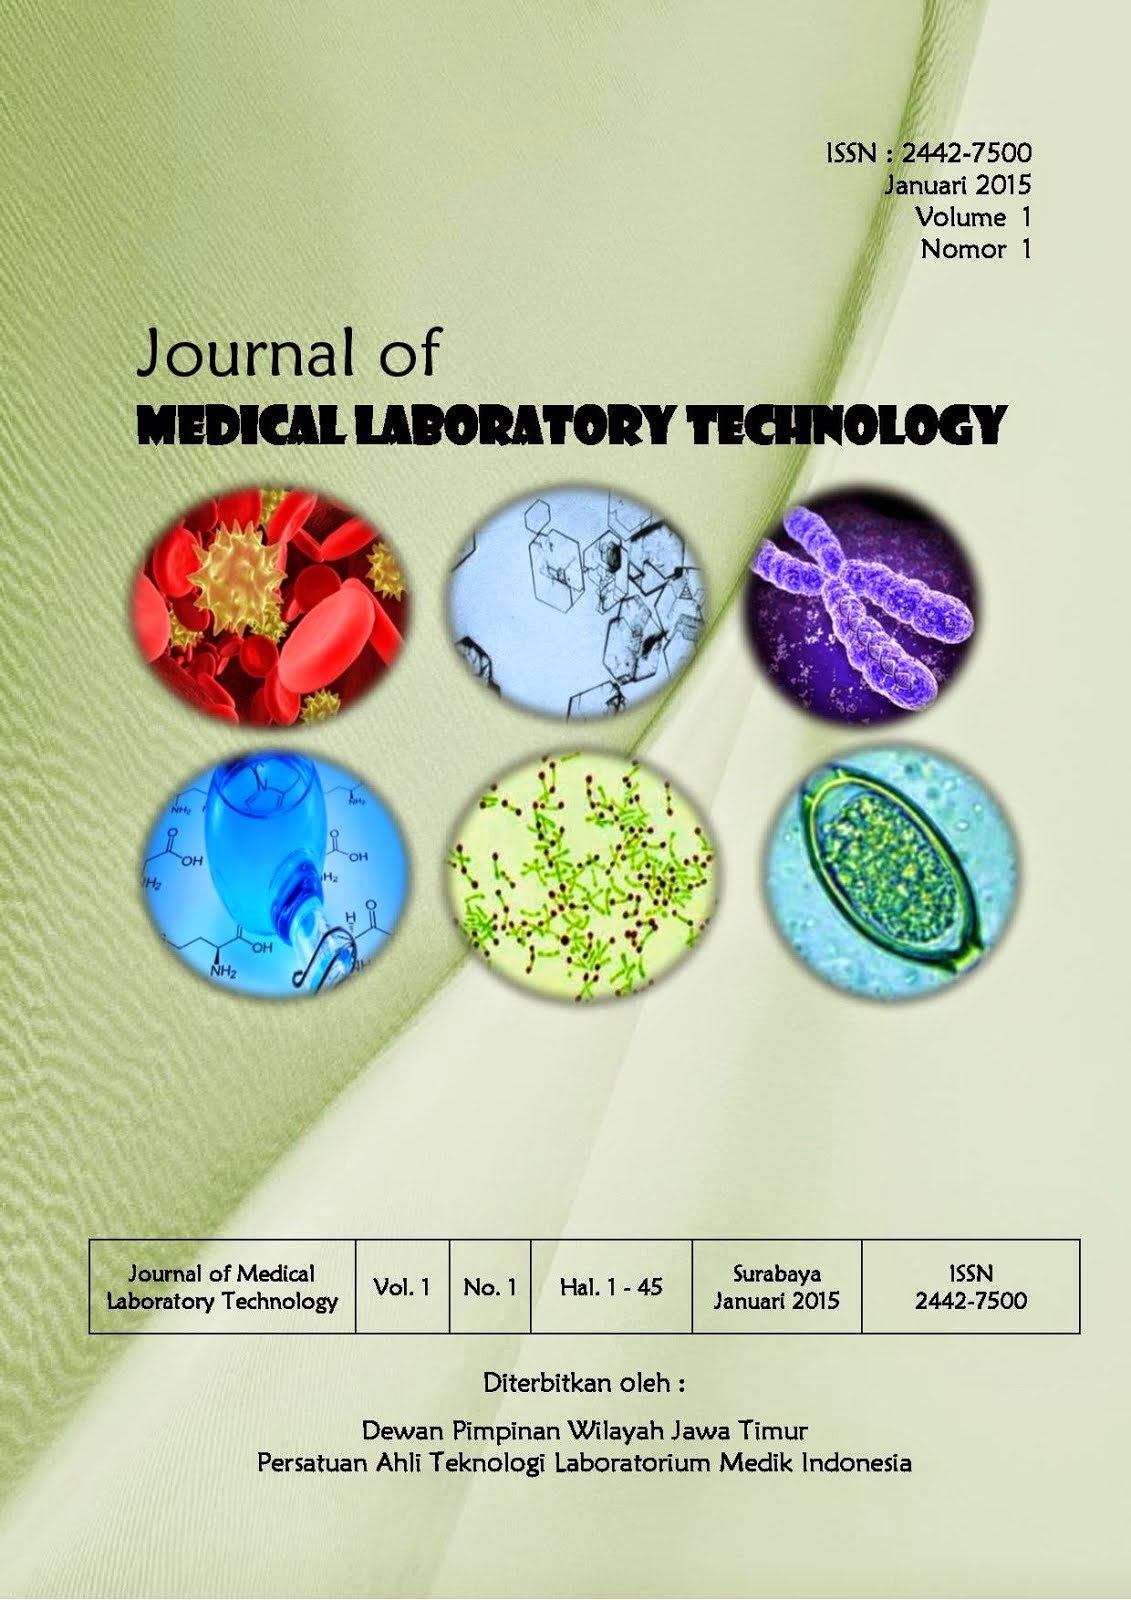 Journal of Medical Laboratory Technology